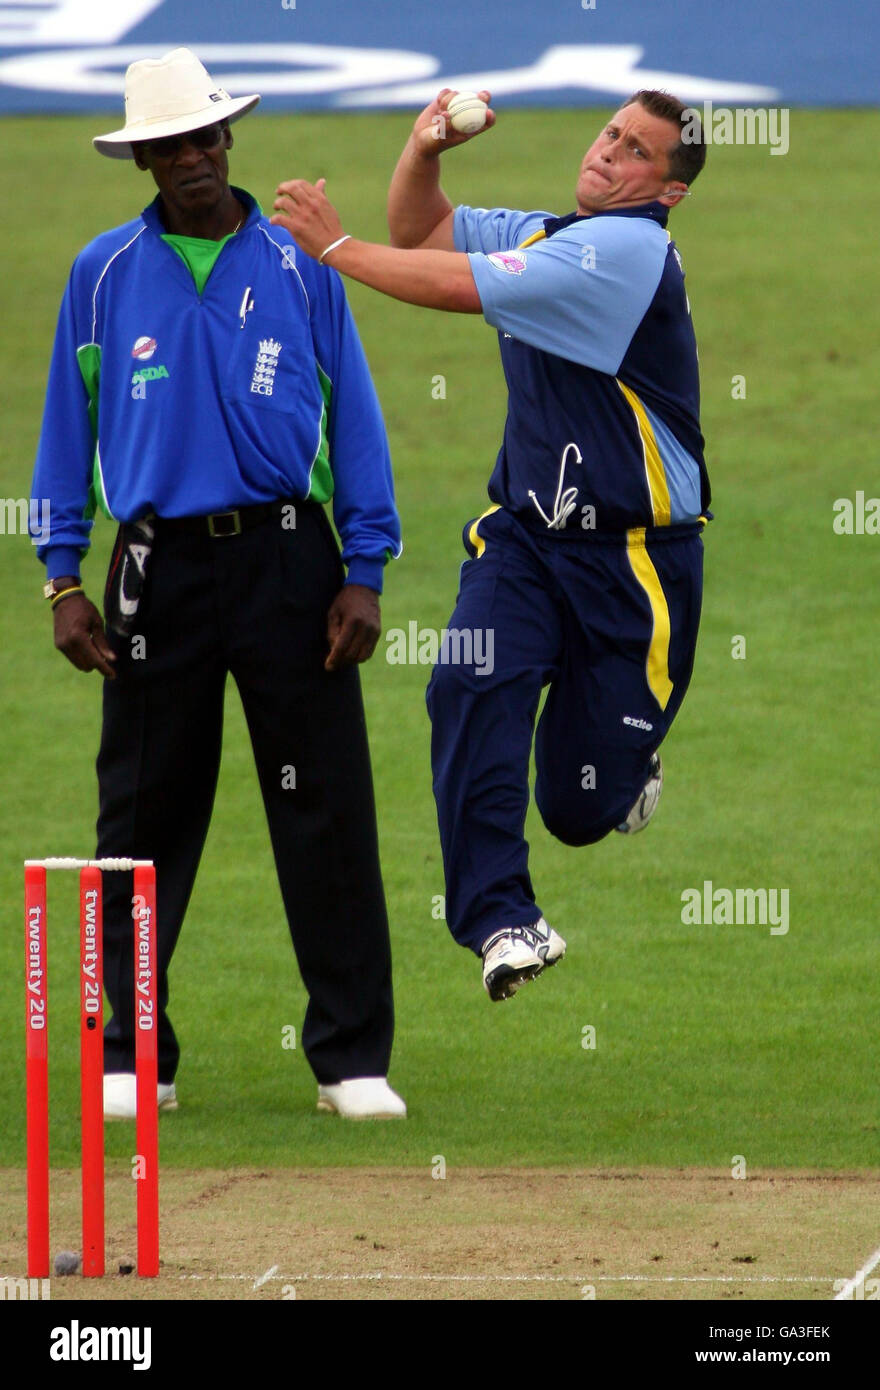 Cricket - Venti20 Cup - sezione nord - Leicestershire v Yorkshire - County Ground Foto Stock